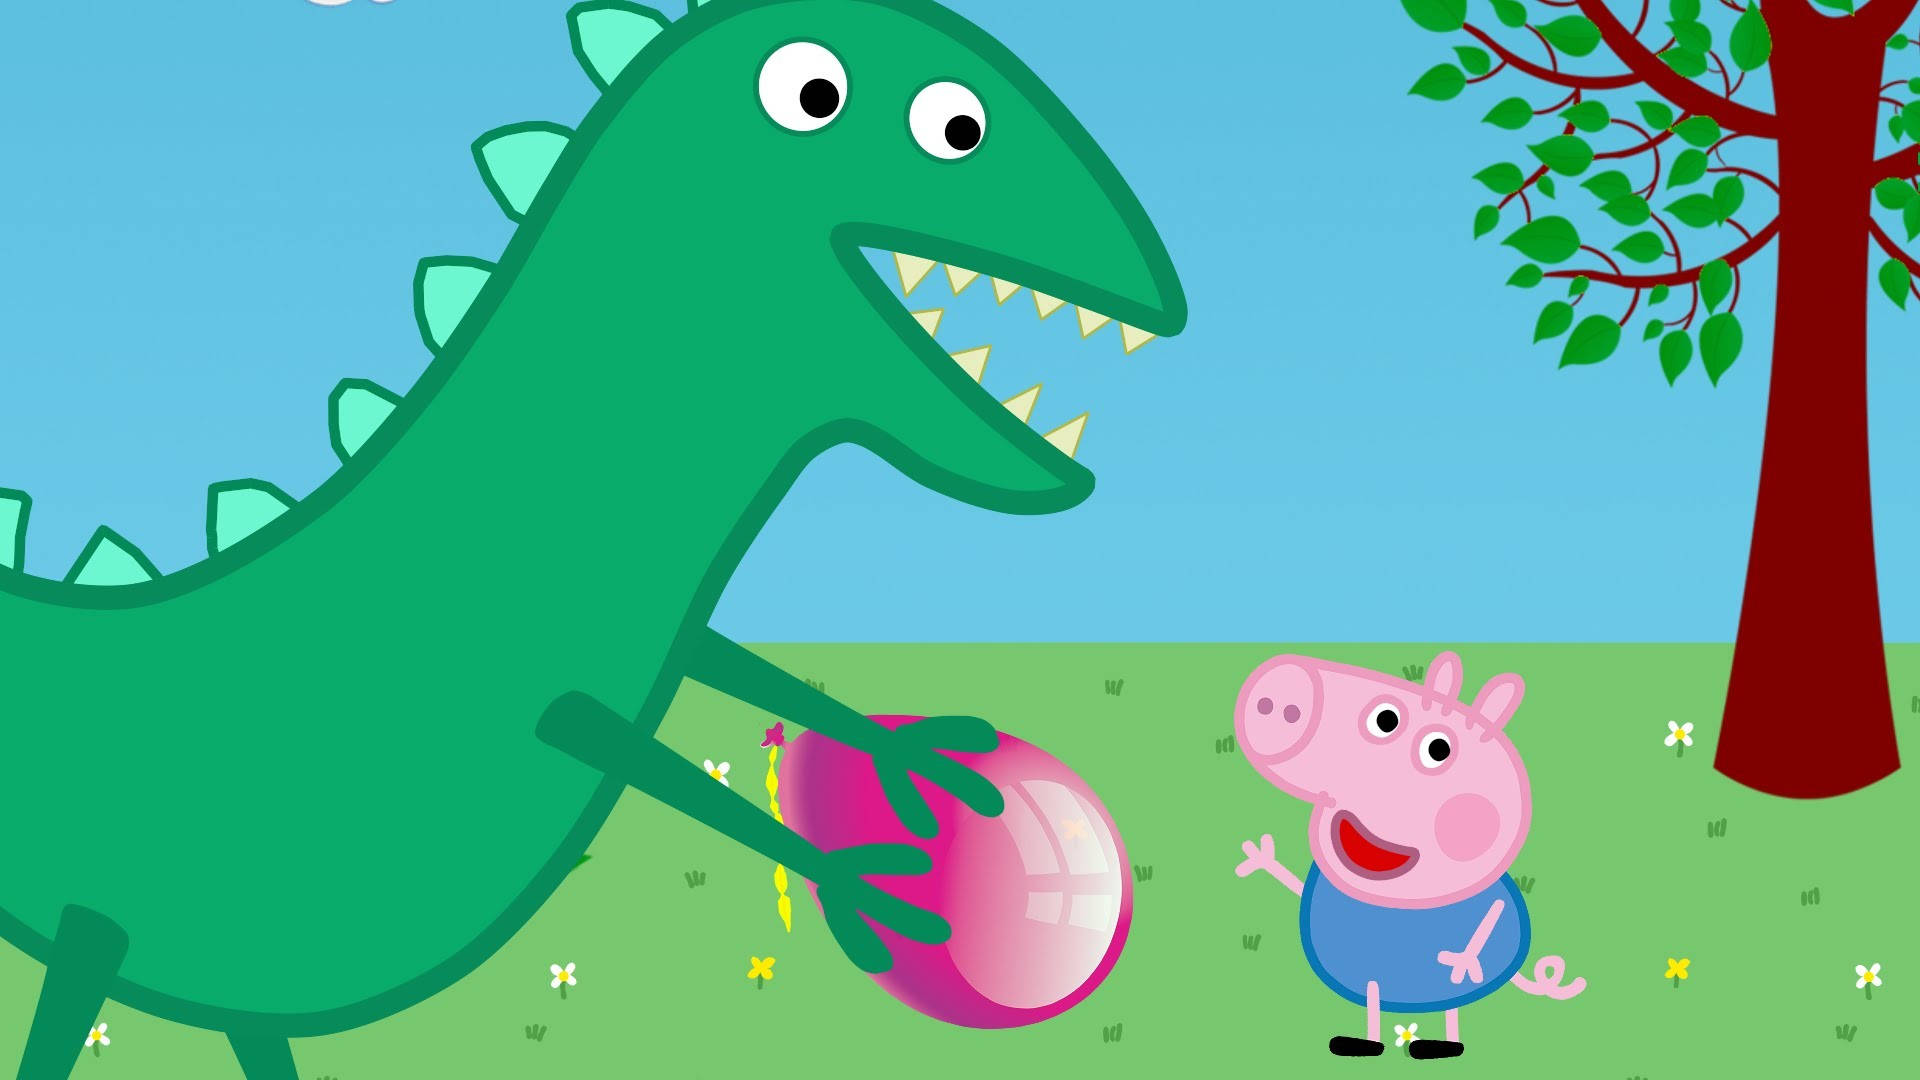 Peppa Pig and her best friend, the dinosaur, hanging out at the park Wallpaper